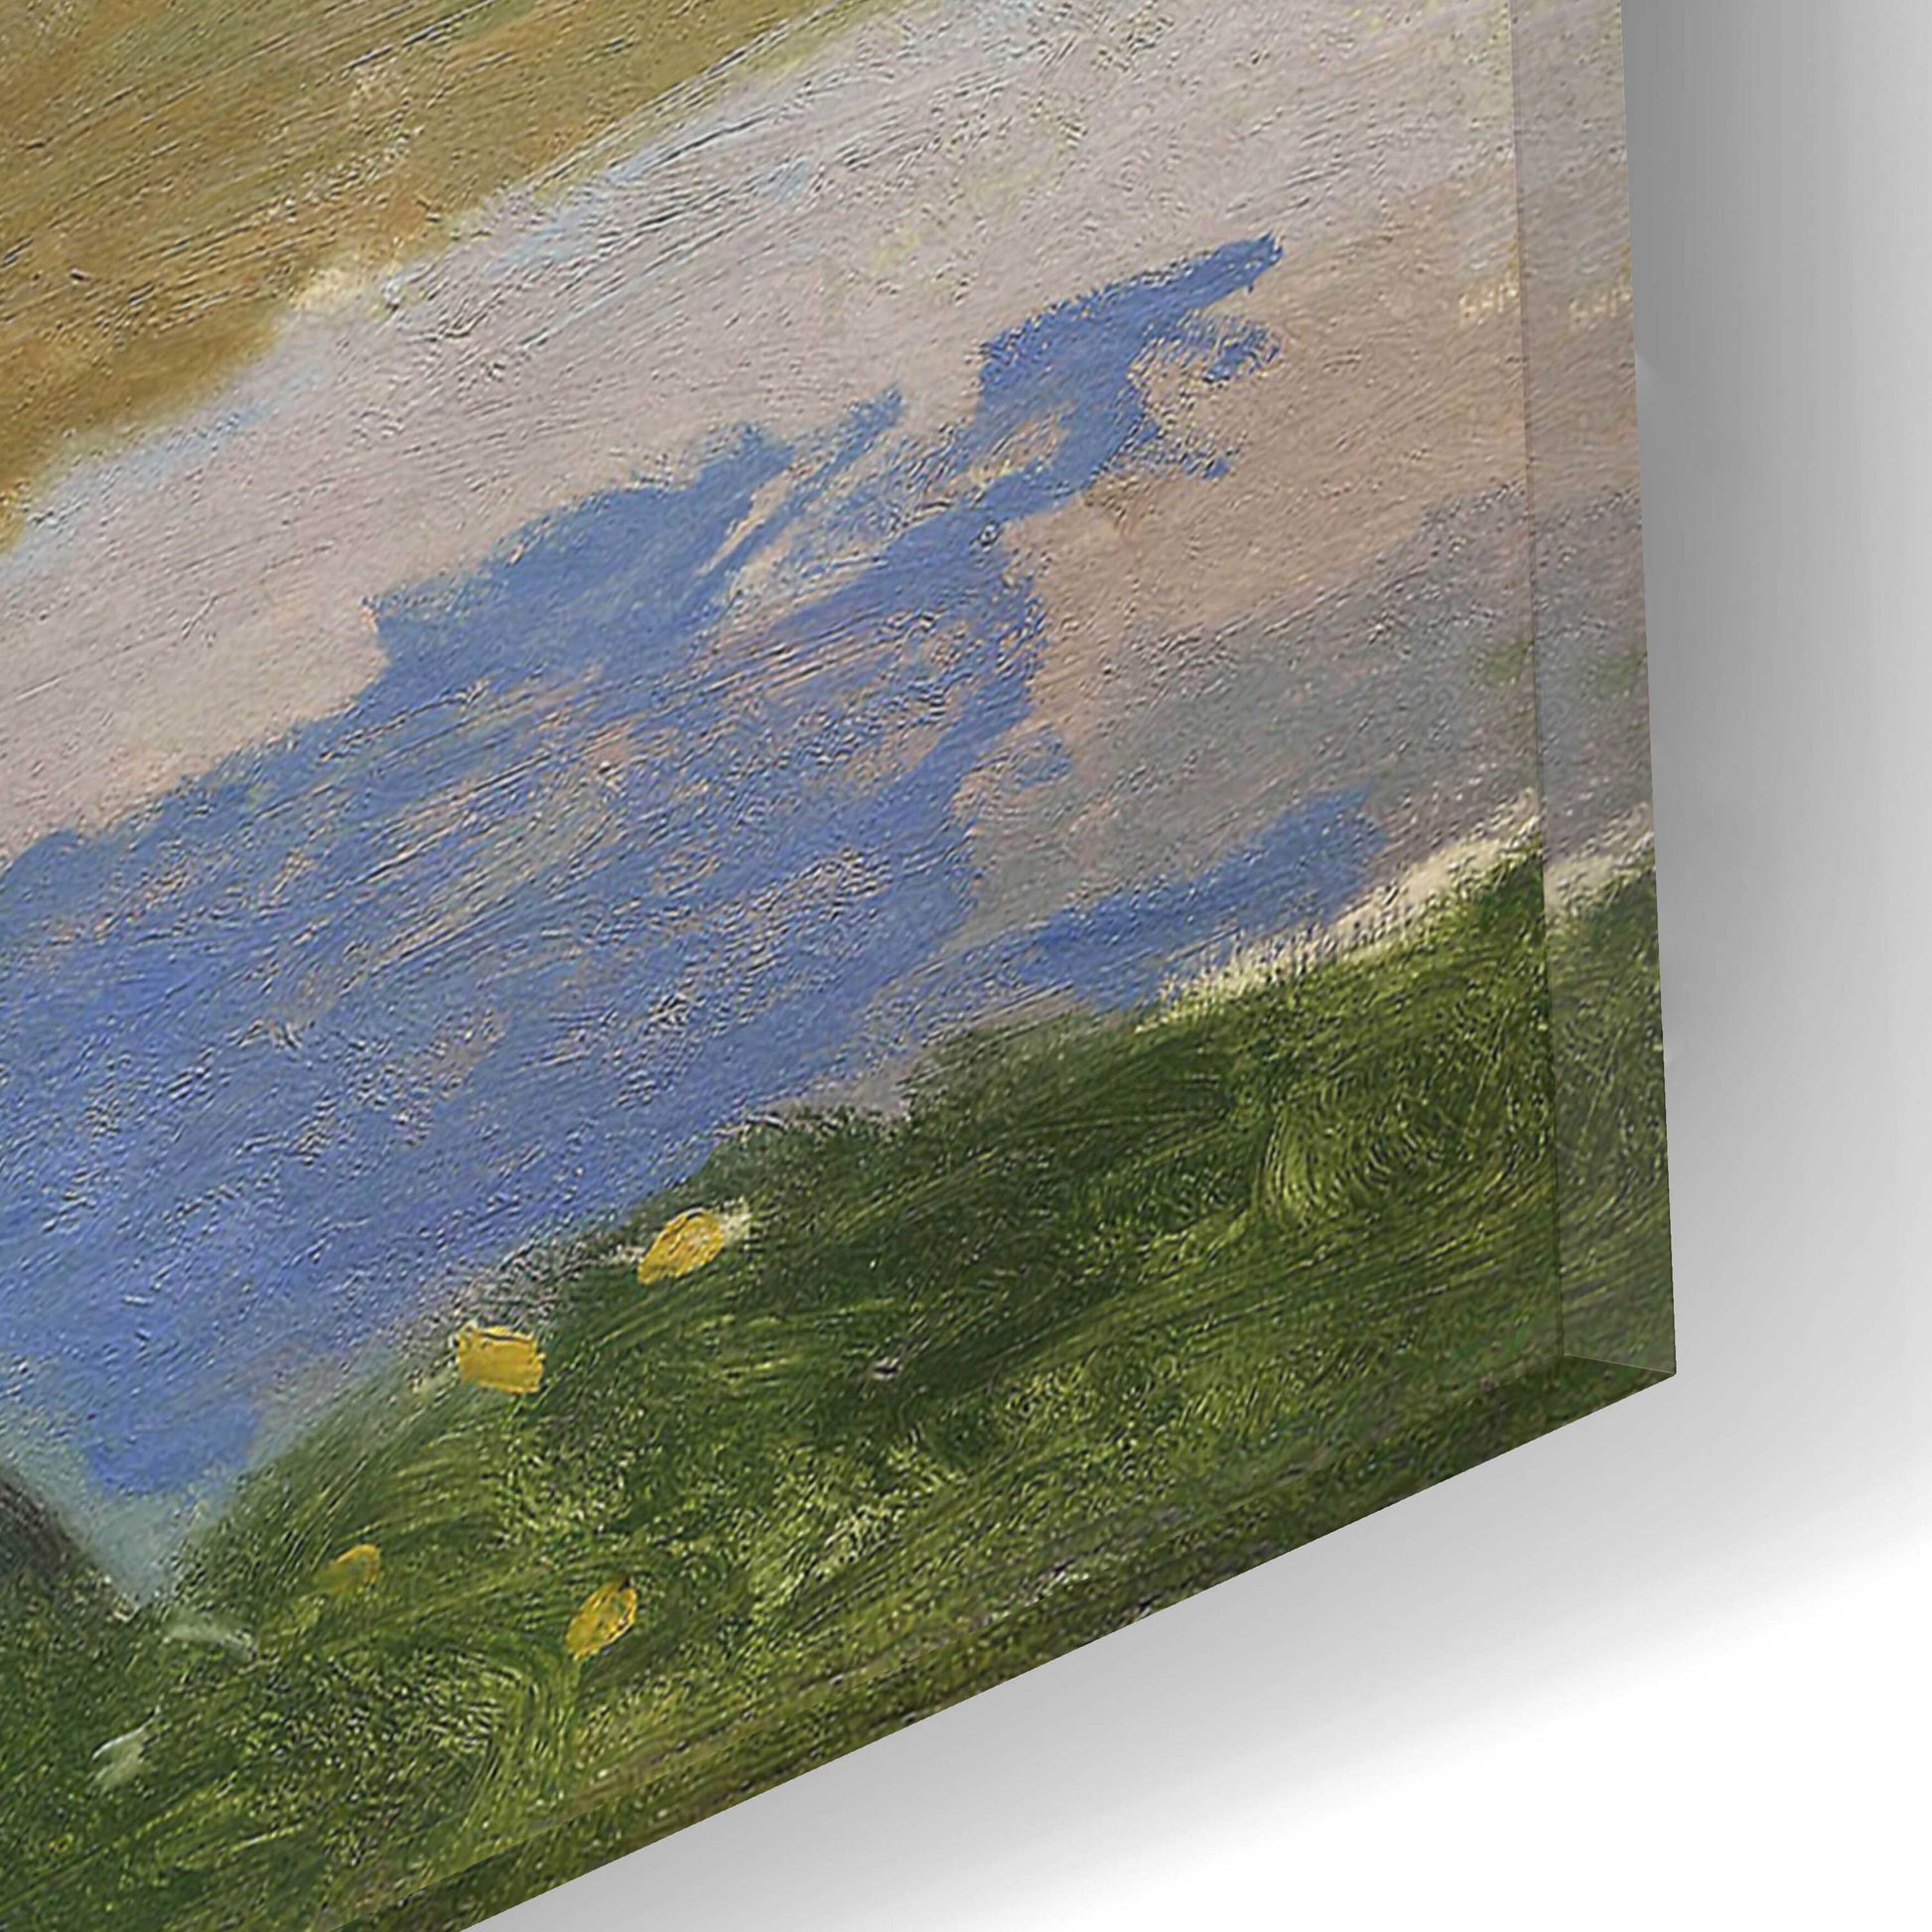 Epic Art 'On The Bank Of The Seine, Bennecourt' by Claude Monet, Acrylic Glass Wall Art,16x12